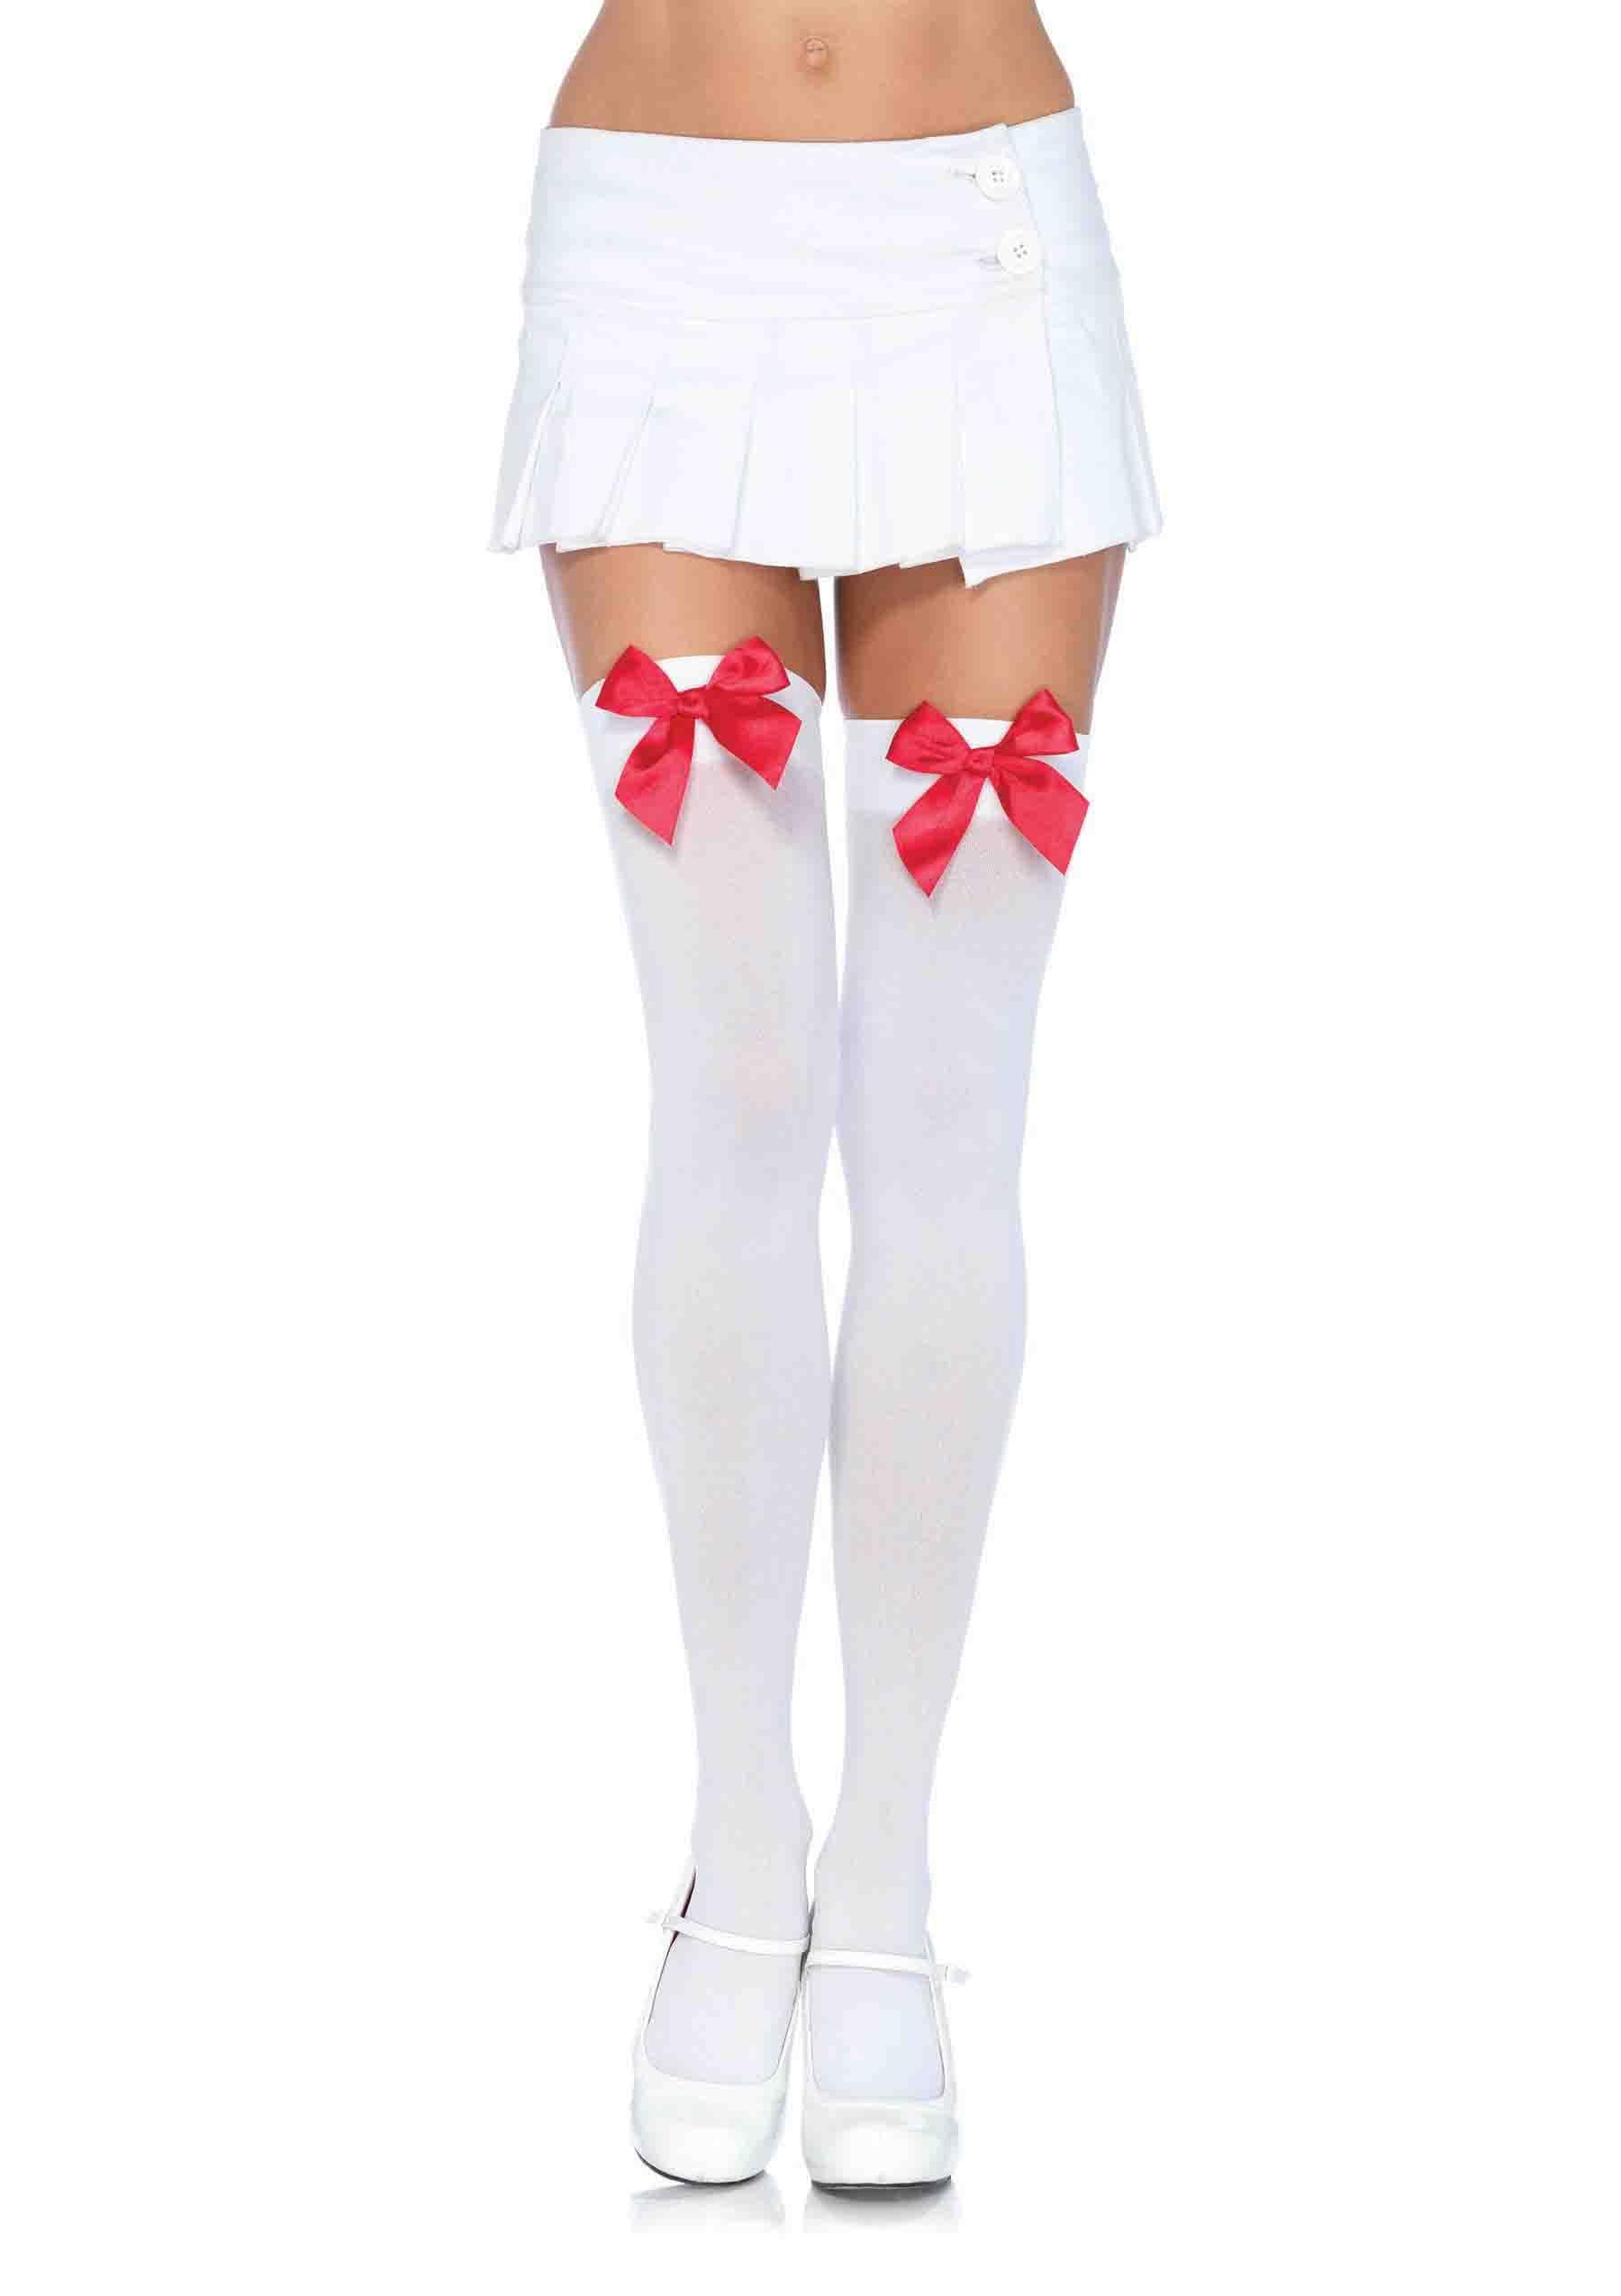 nylon over the knee socks white with red bow